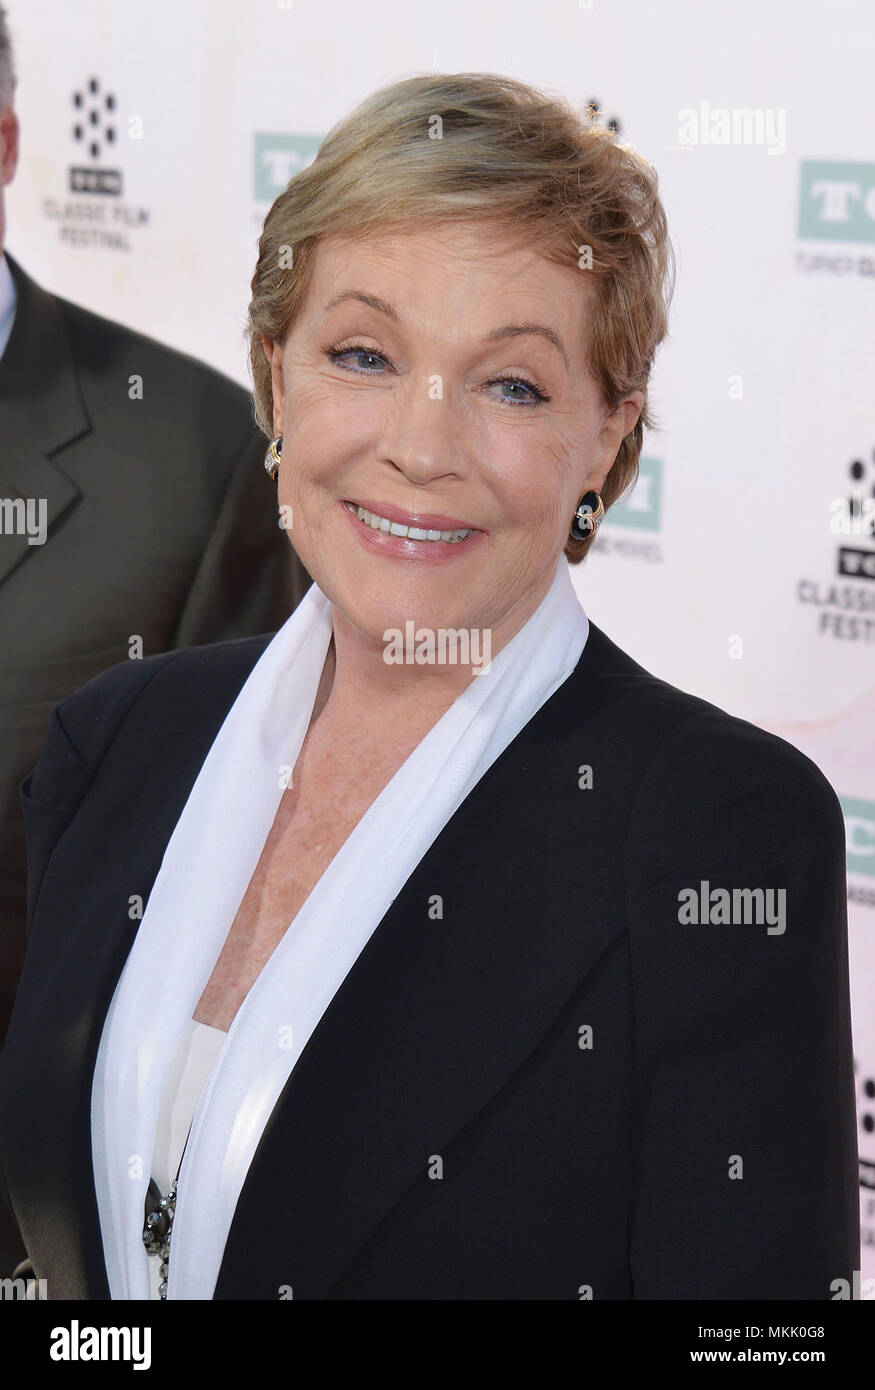 Julie Andrews 023 at The Sound Of Music Premiere at the TCL Chinese Theatre in Los Angeles. March 26, 2015.Julie Andrews 023  Event in Hollywood Life - California,  Red Carpet Event, Vertical, USA, Film Industry, Celebrities,  Photography, Bestof, Arts Culture and Entertainment, Topix Celebrities fashion / one person, Vertical, Best of, Hollywood Life, Event in Hollywood Life - California,  Red Carpet and backstage, USA, Film Industry, Celebrities,  movie celebrities, TV celebrities, Music celebrities, Photography, Bestof, Arts Culture and Entertainment,  Topix, headshot, vertical, from the ye Stock Photo